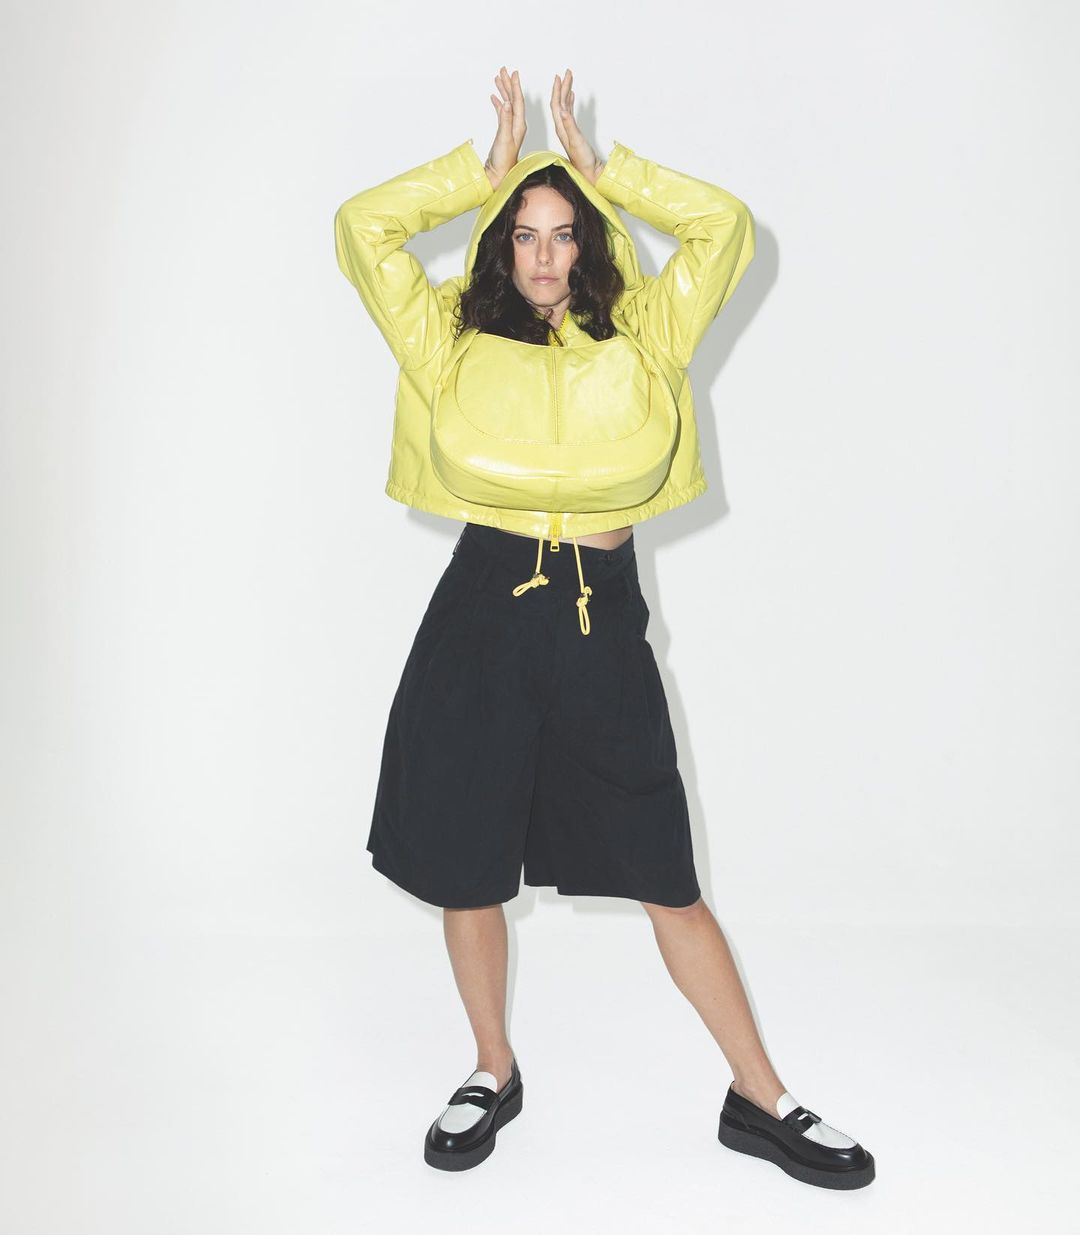 Kaya's Breathtaking Look In Yellow And Black Combo Fit With Matching Yellow Purse